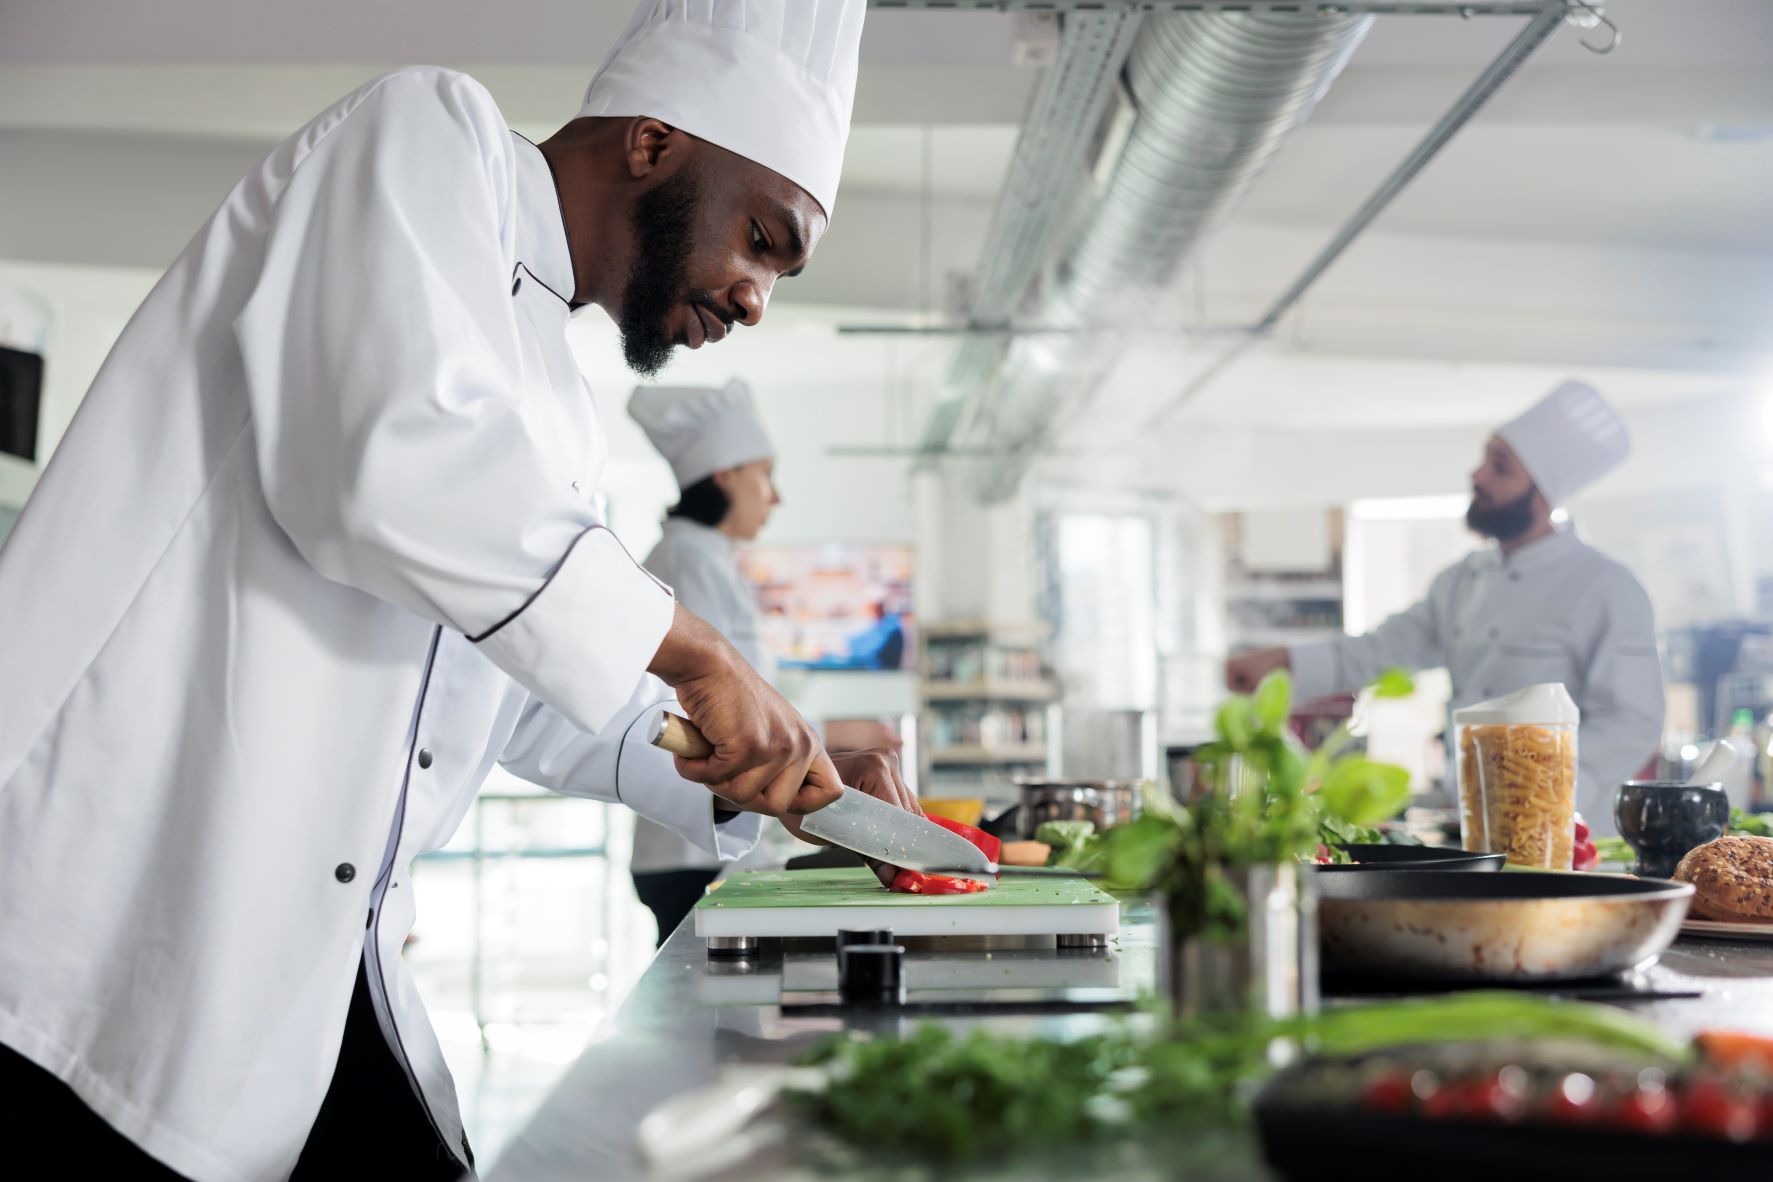 Finding a Niche Market in The Restaurant Industry